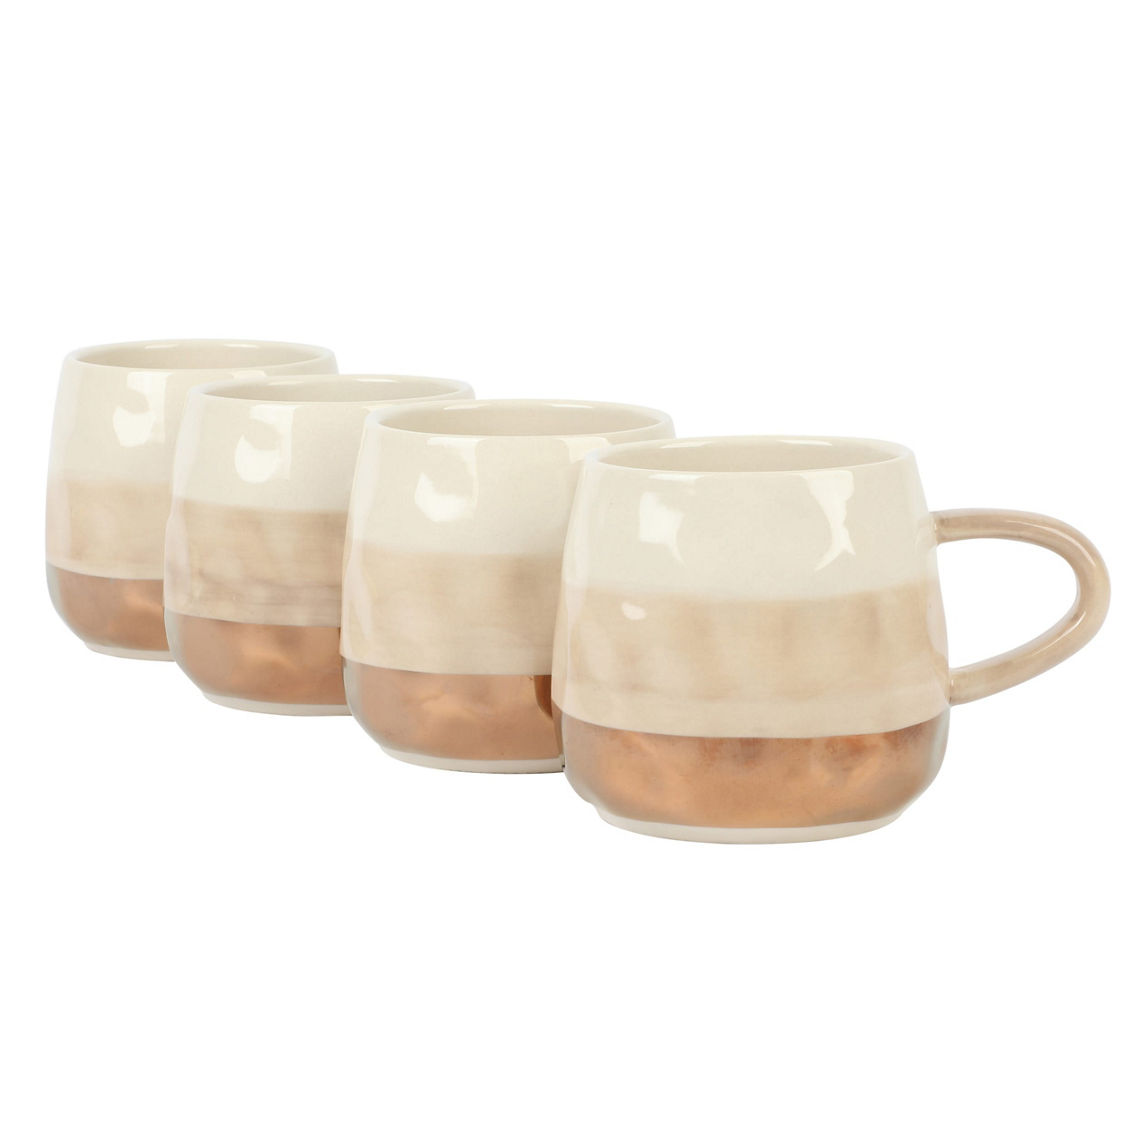 Cravings By Chrissy Teigen 4 Piece 18 Ounce Stoneware Cup Set in Dove Gray - Image 3 of 5